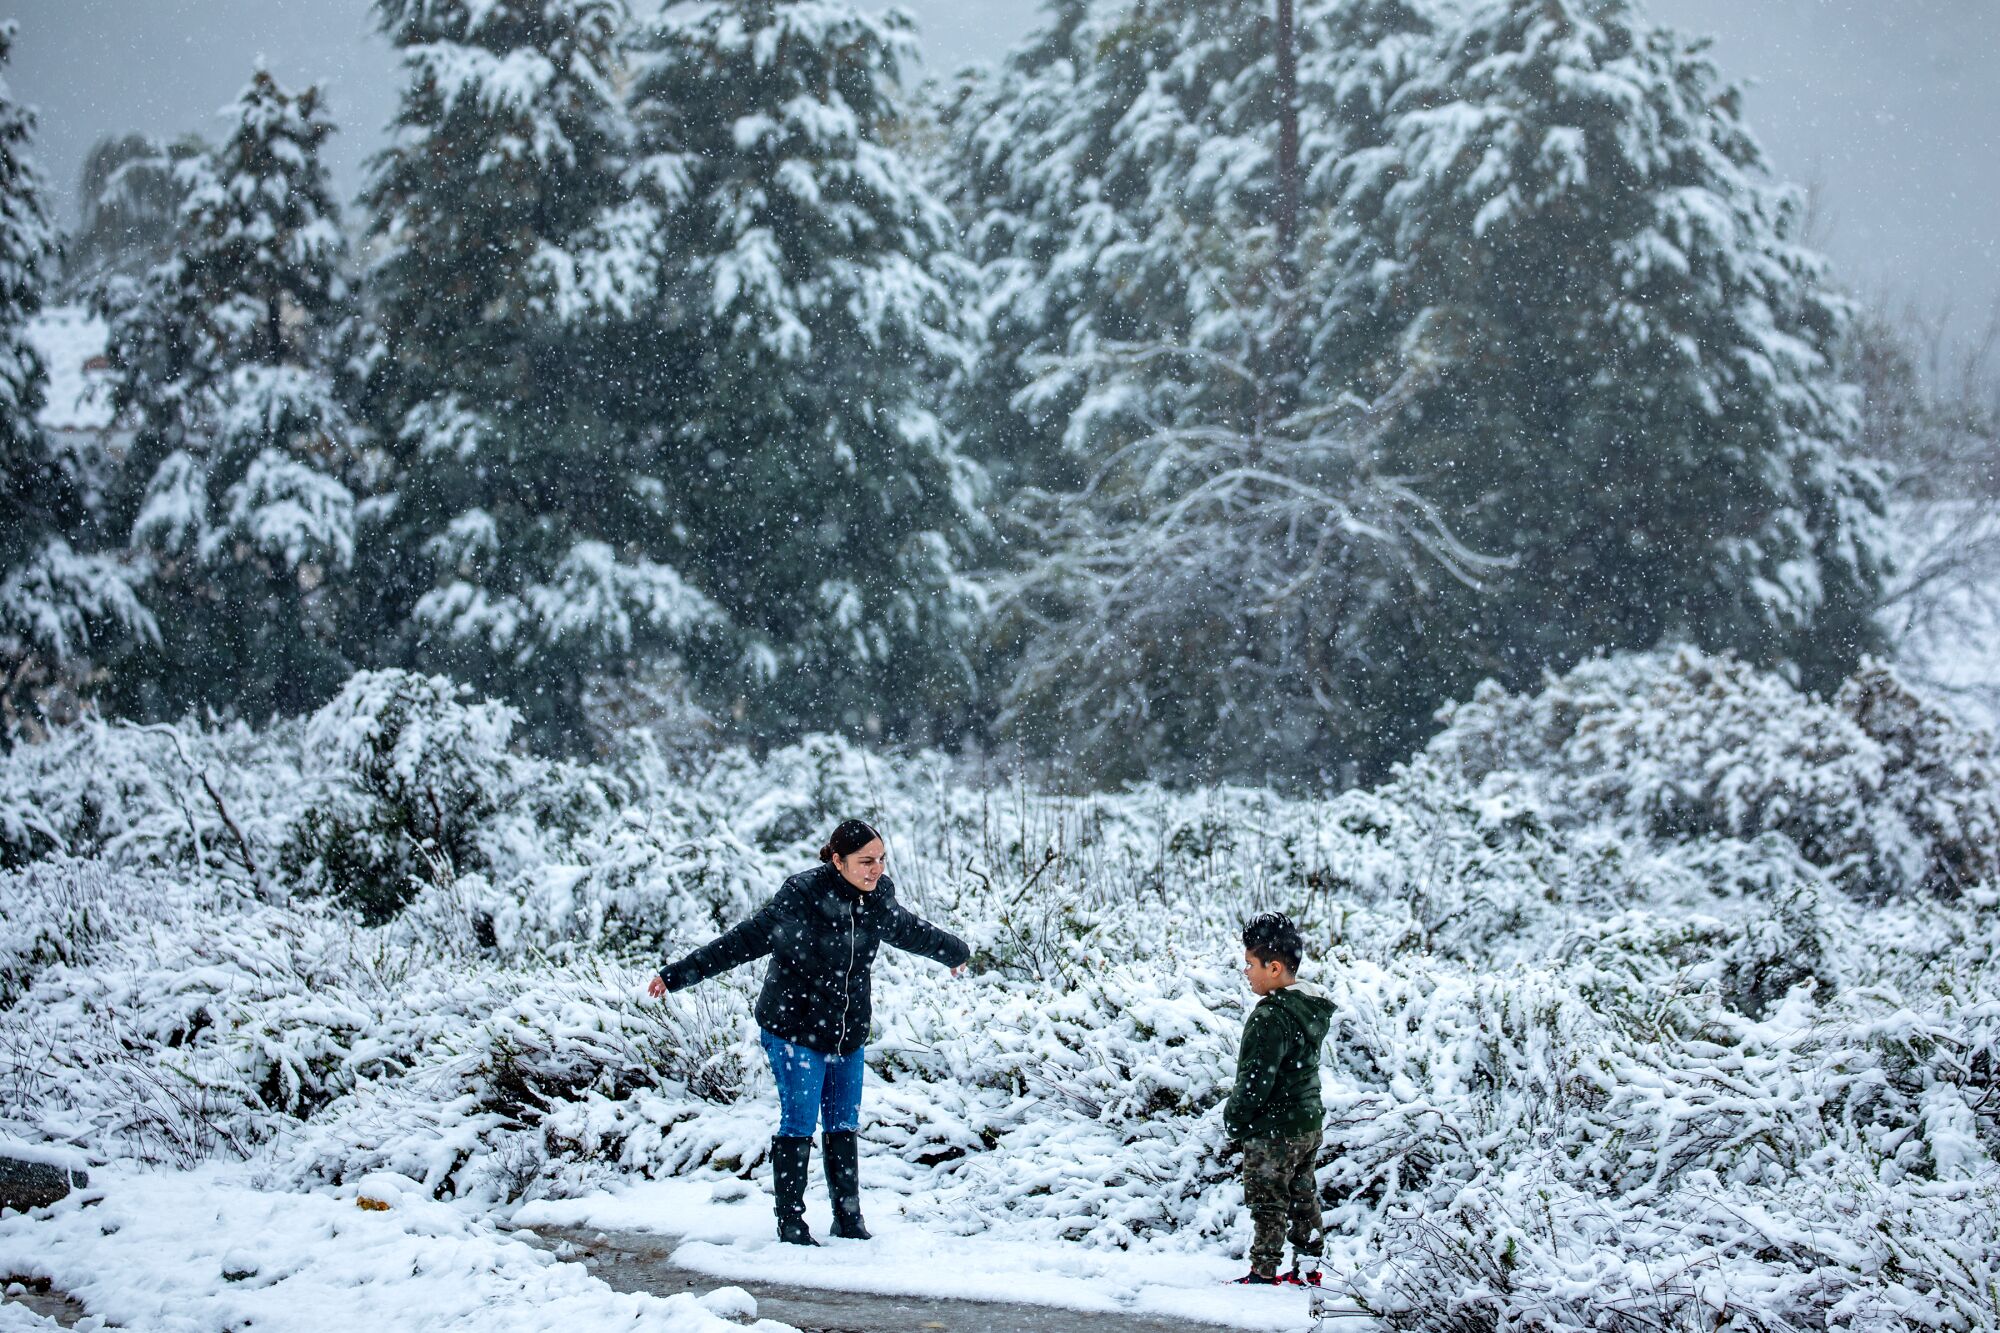 Valeria Roman, 23, left, and her 5-year-old-son, Emiliano India Roman, play in freshly fallen snow in Rancho Cucamonga.